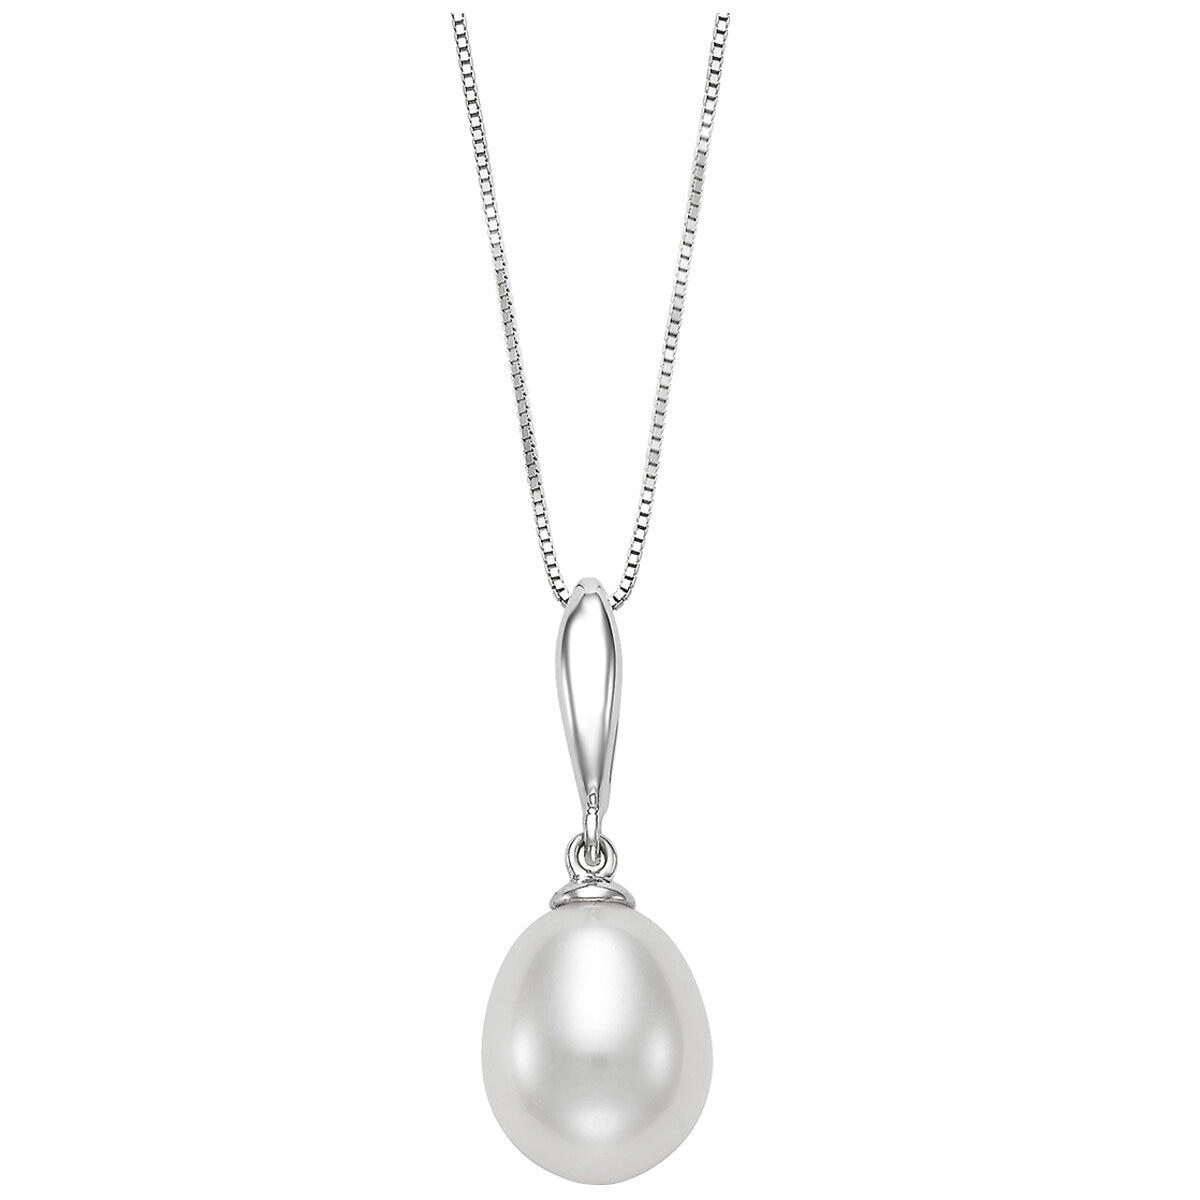 14KT White Gold 9.5-10mm Cultured Freshwater Pearl Pendant